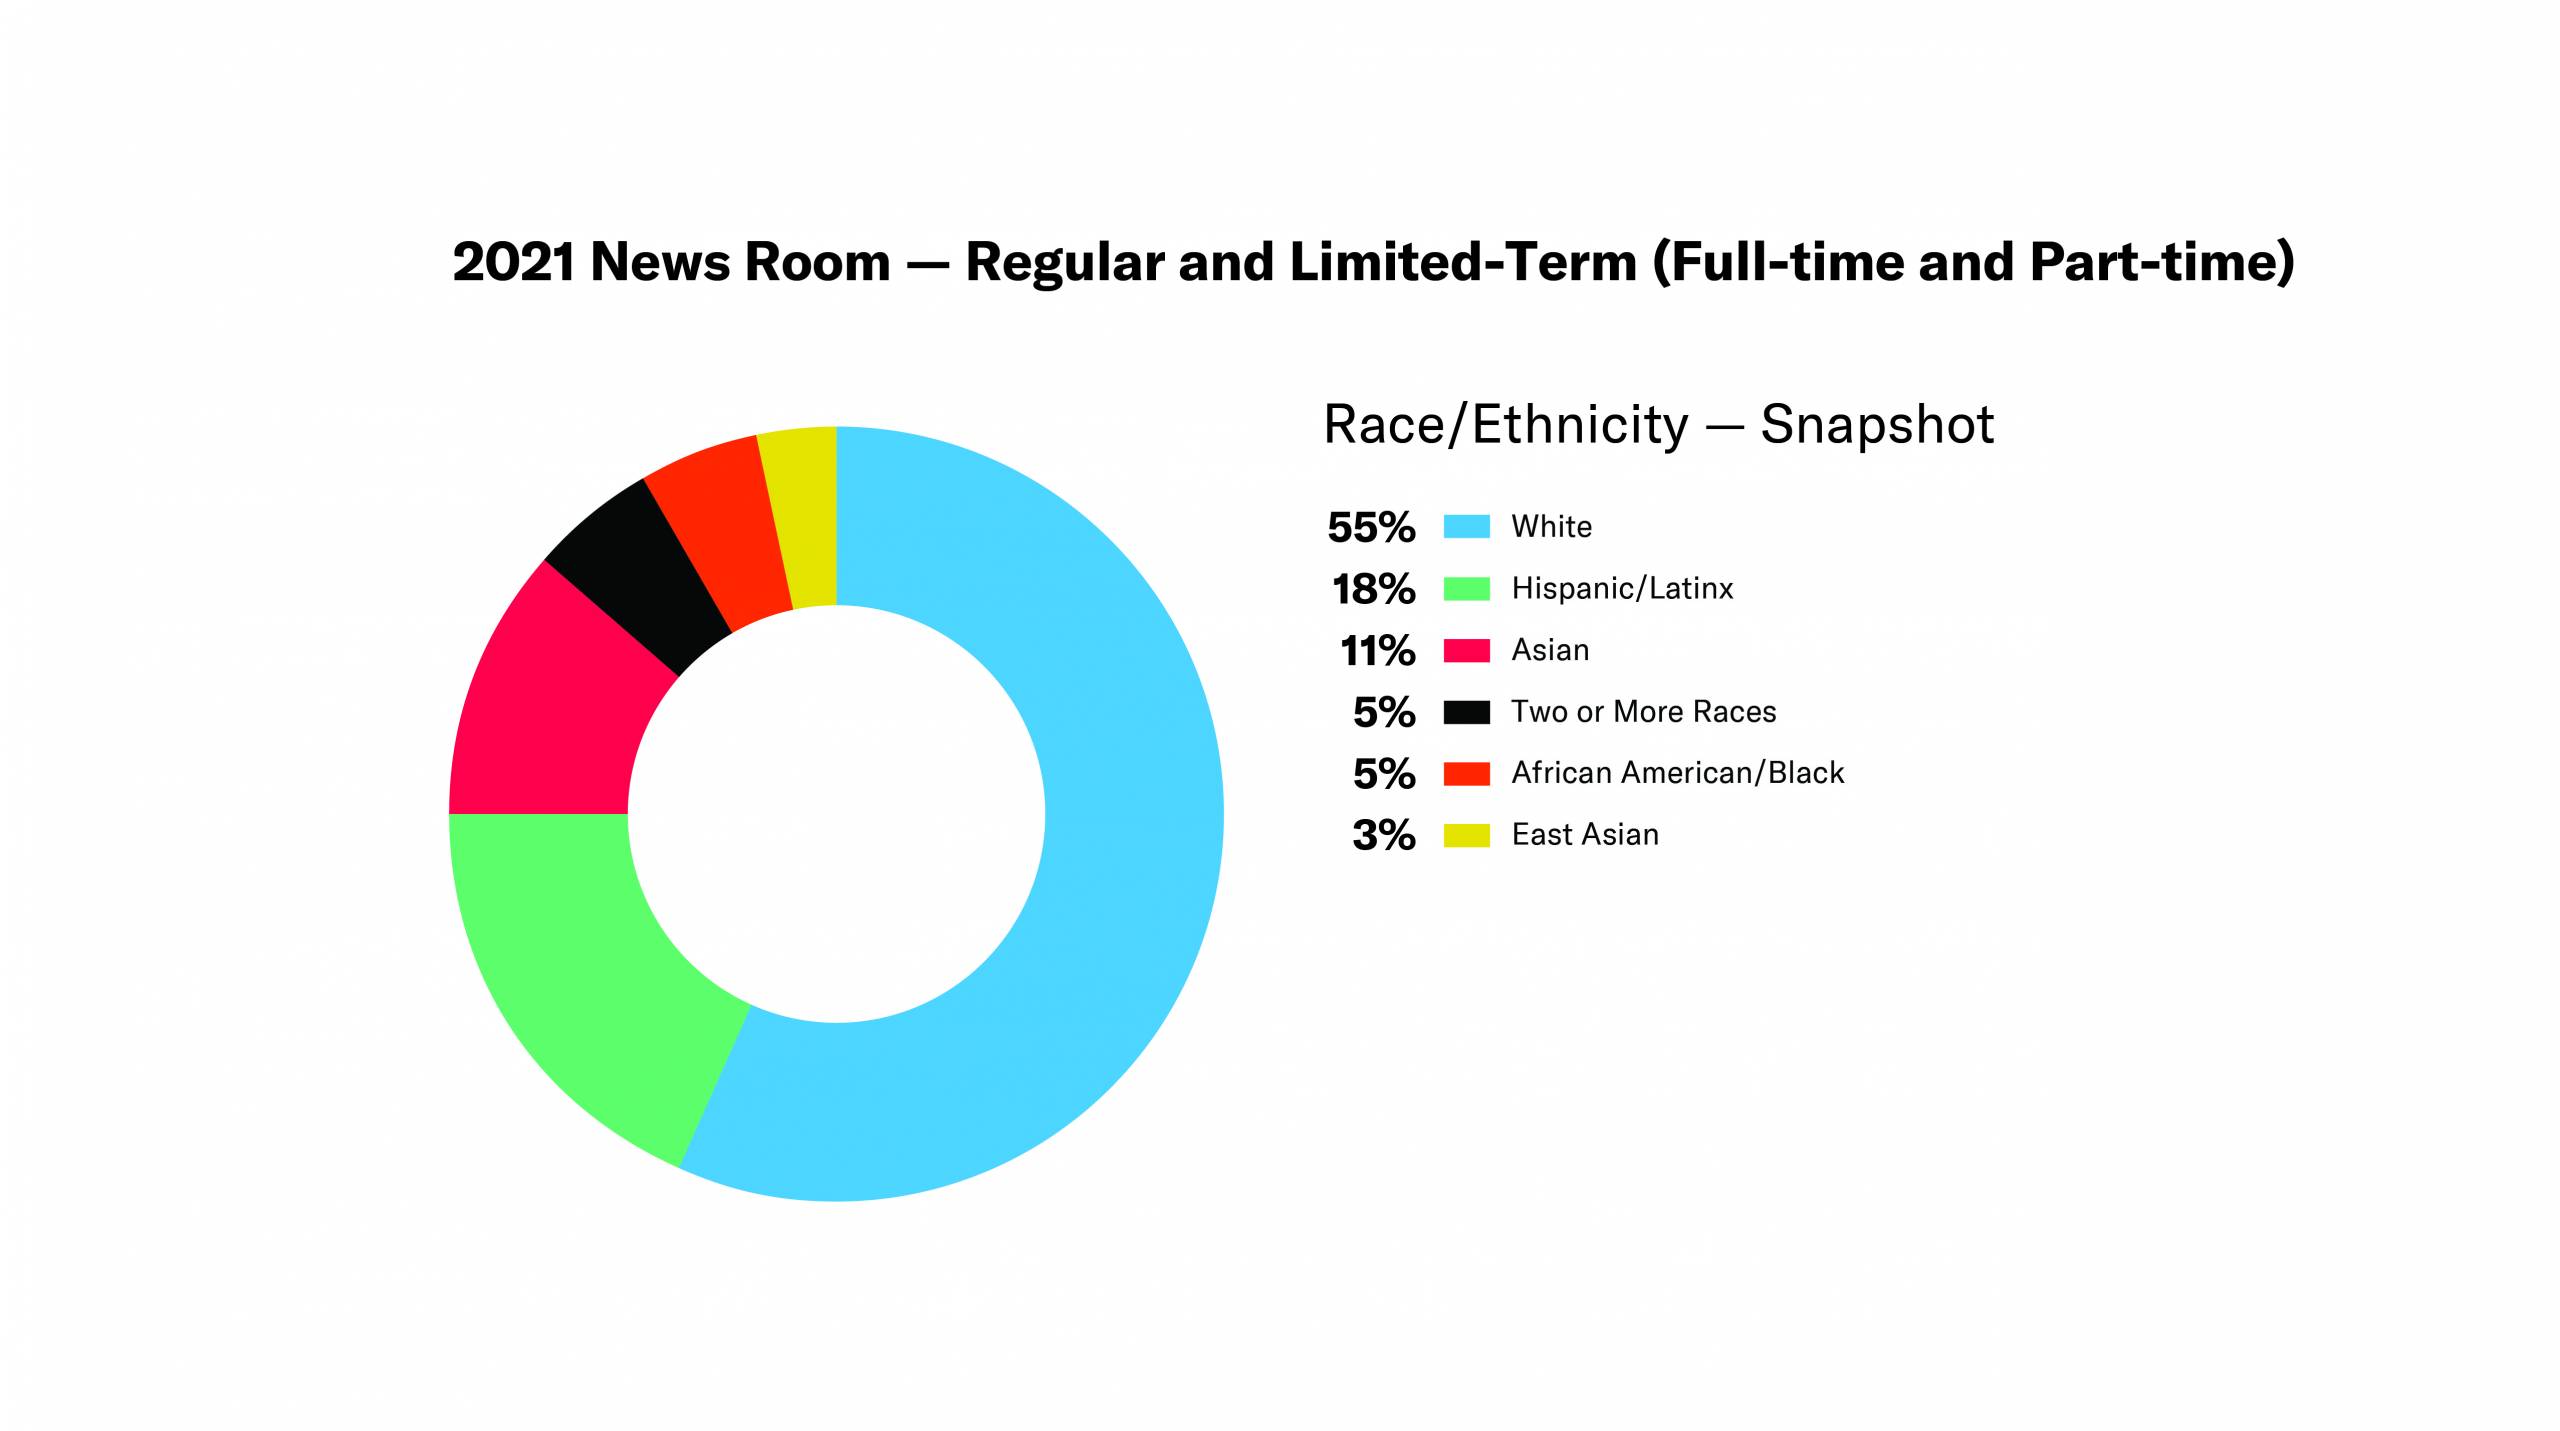 Donut Chart - 2021 News Room — Regular and Limited-Term (Full-time and Part-time) - Race/ethnicity snapshot